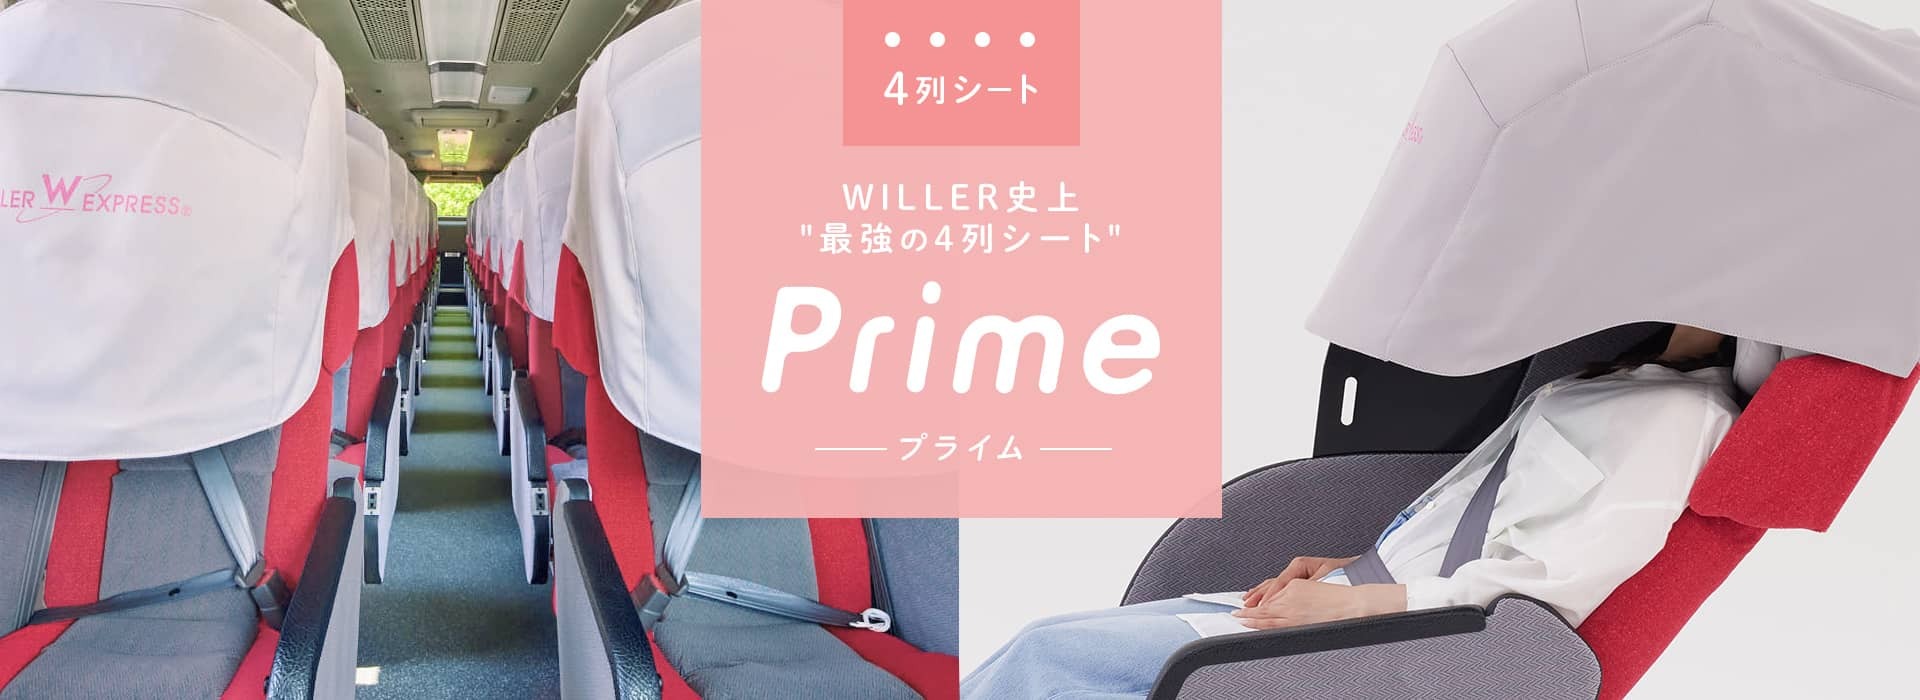 WILLER EXPRESS：WILLER史上最強の新4列シートが新たに東京～名古屋間で運行開始！ ～公募の結果、新シートの名称は“Prime（プライム）”に決定～